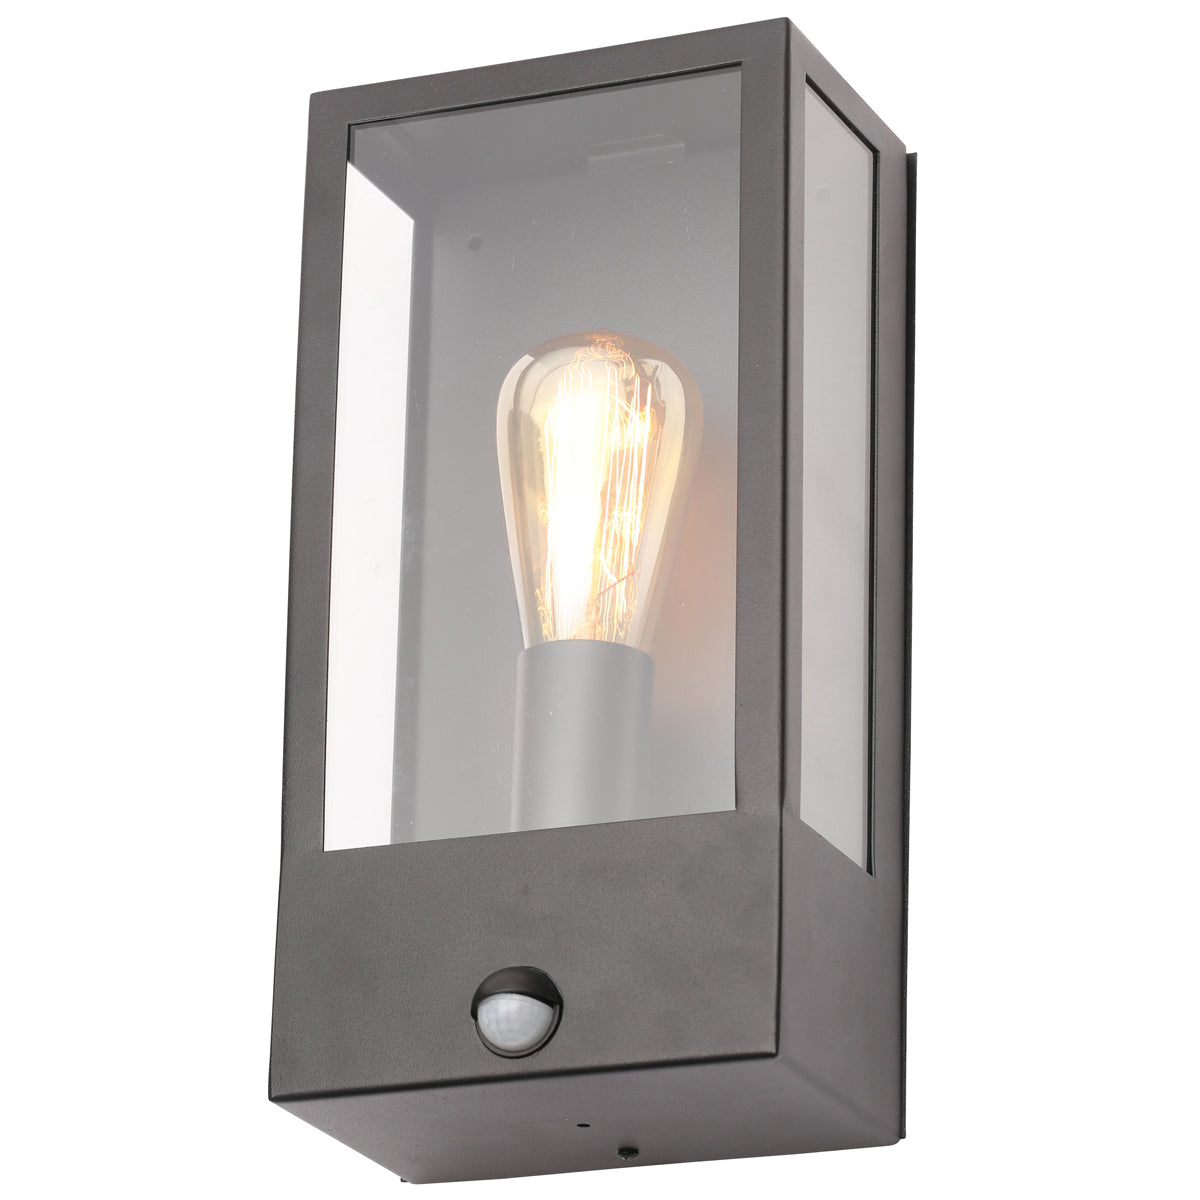 Explore our black square wall light today, fit with a clear glass diffuser and motion sensor features! If you require a valuable lighting system and an additional layer of security for your home’s outdoor space, then this lighting body can provide the right protection and style for you. 